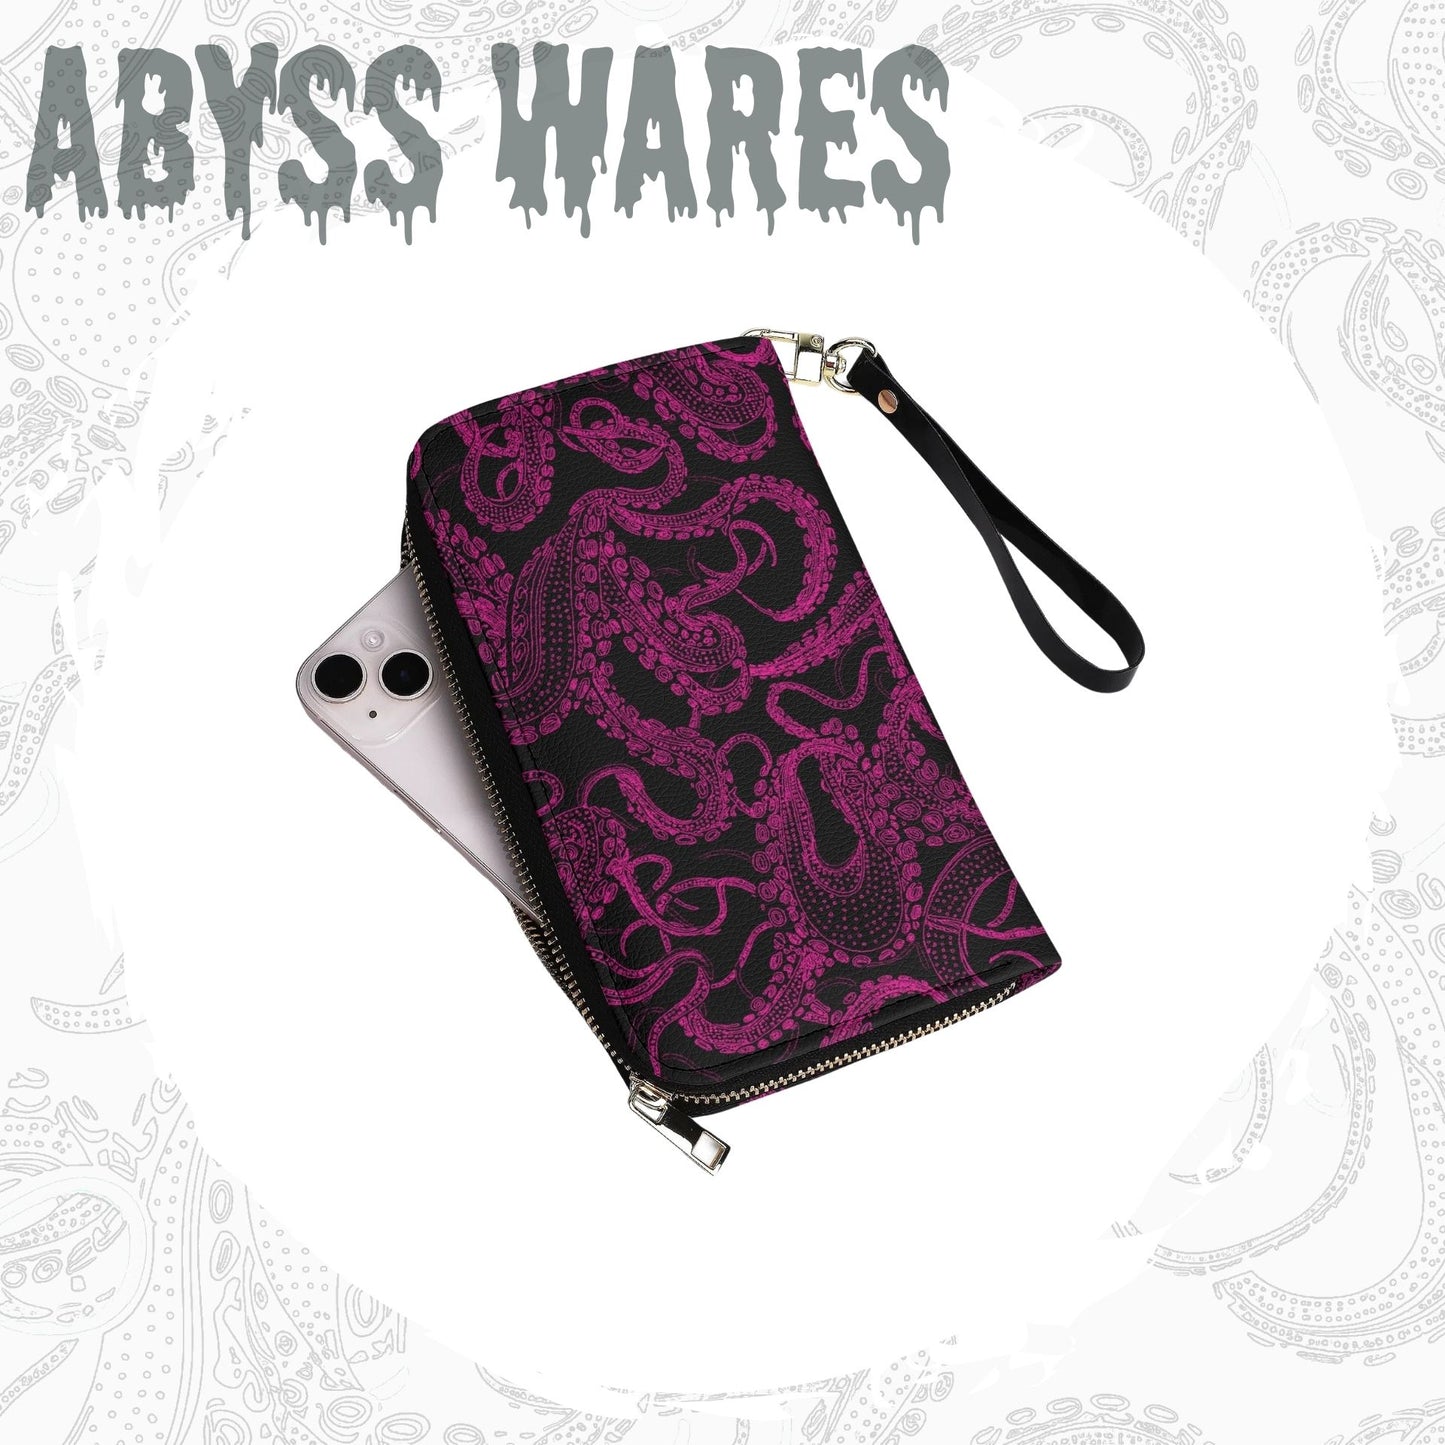 Xray Tentacle Pink Wallet Octopus Wristlet Women Hentai Cryptid Cash Card Holder Whimsigoth Cute Faux Leather Clutch Weird Ladies Wallets